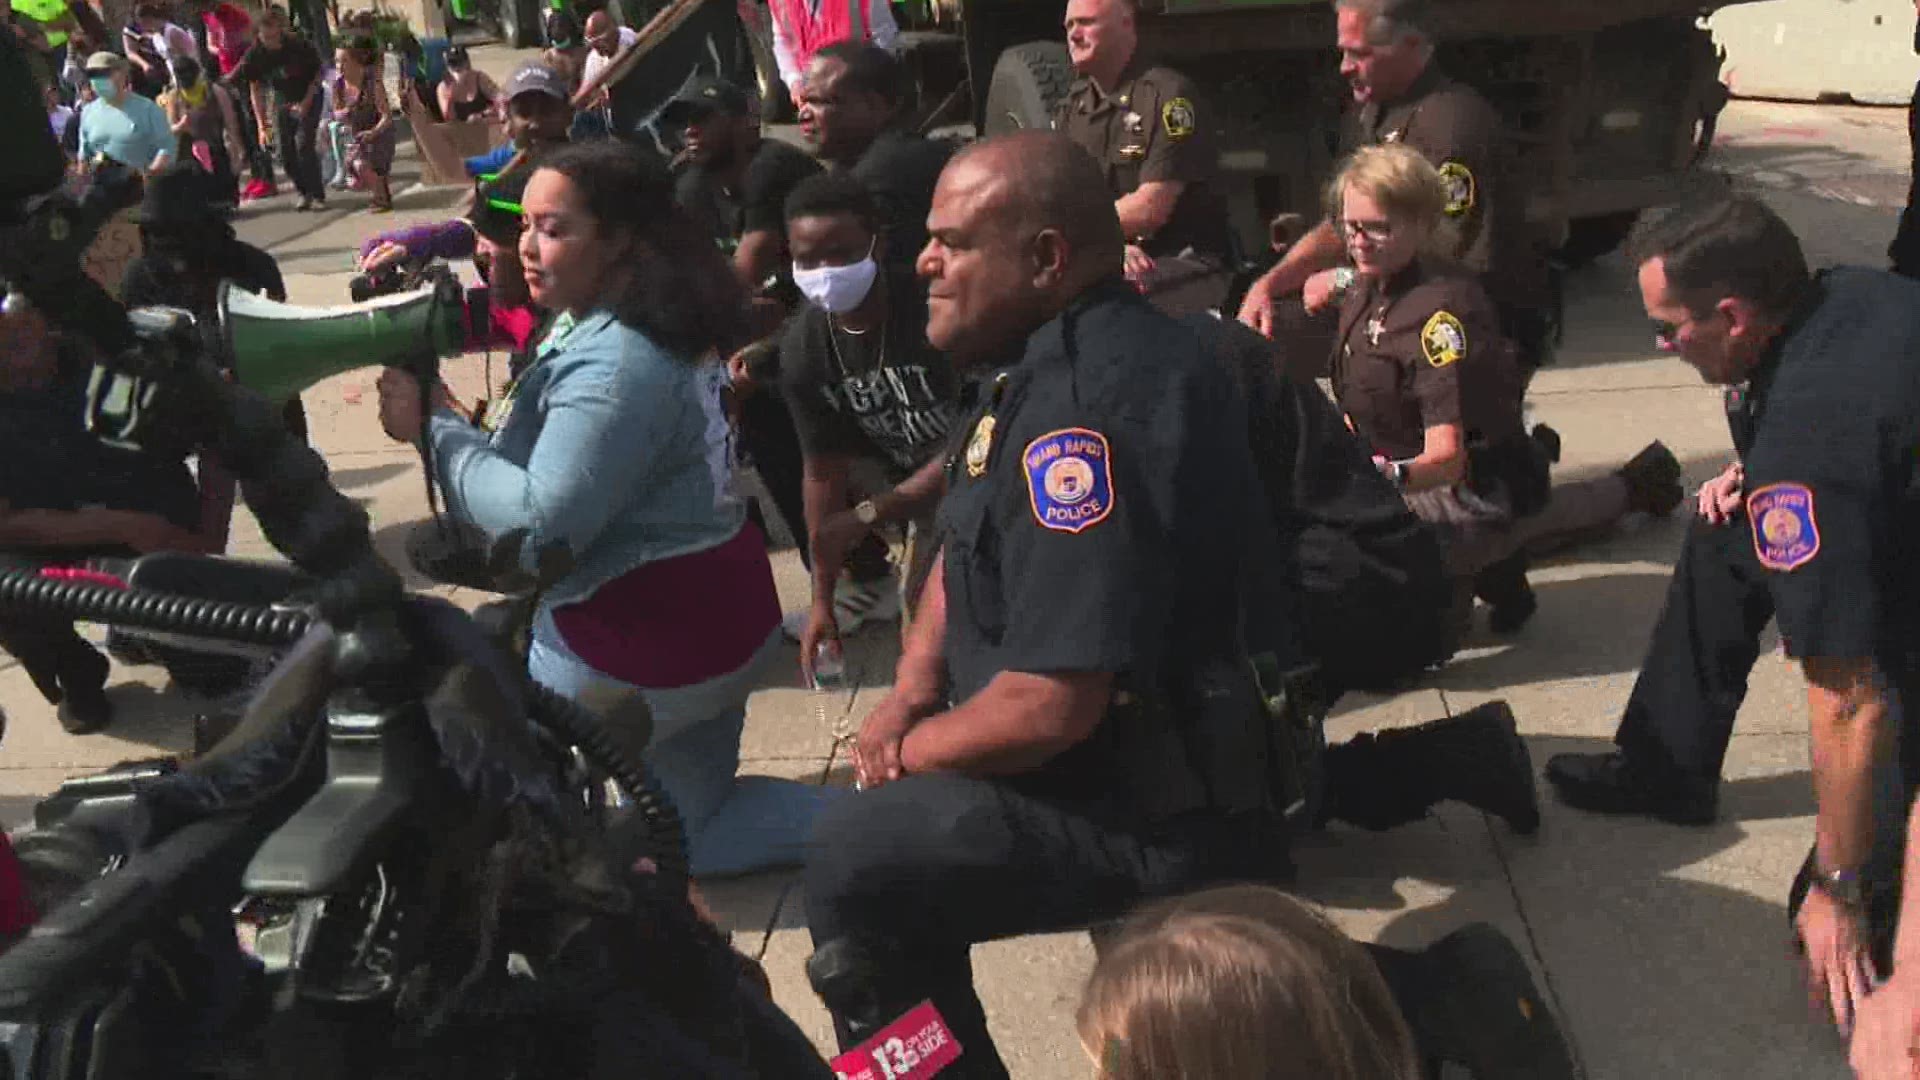 The protest stayed peaceful throughout the day and into the night. Protesters left after three deputies took a knee.